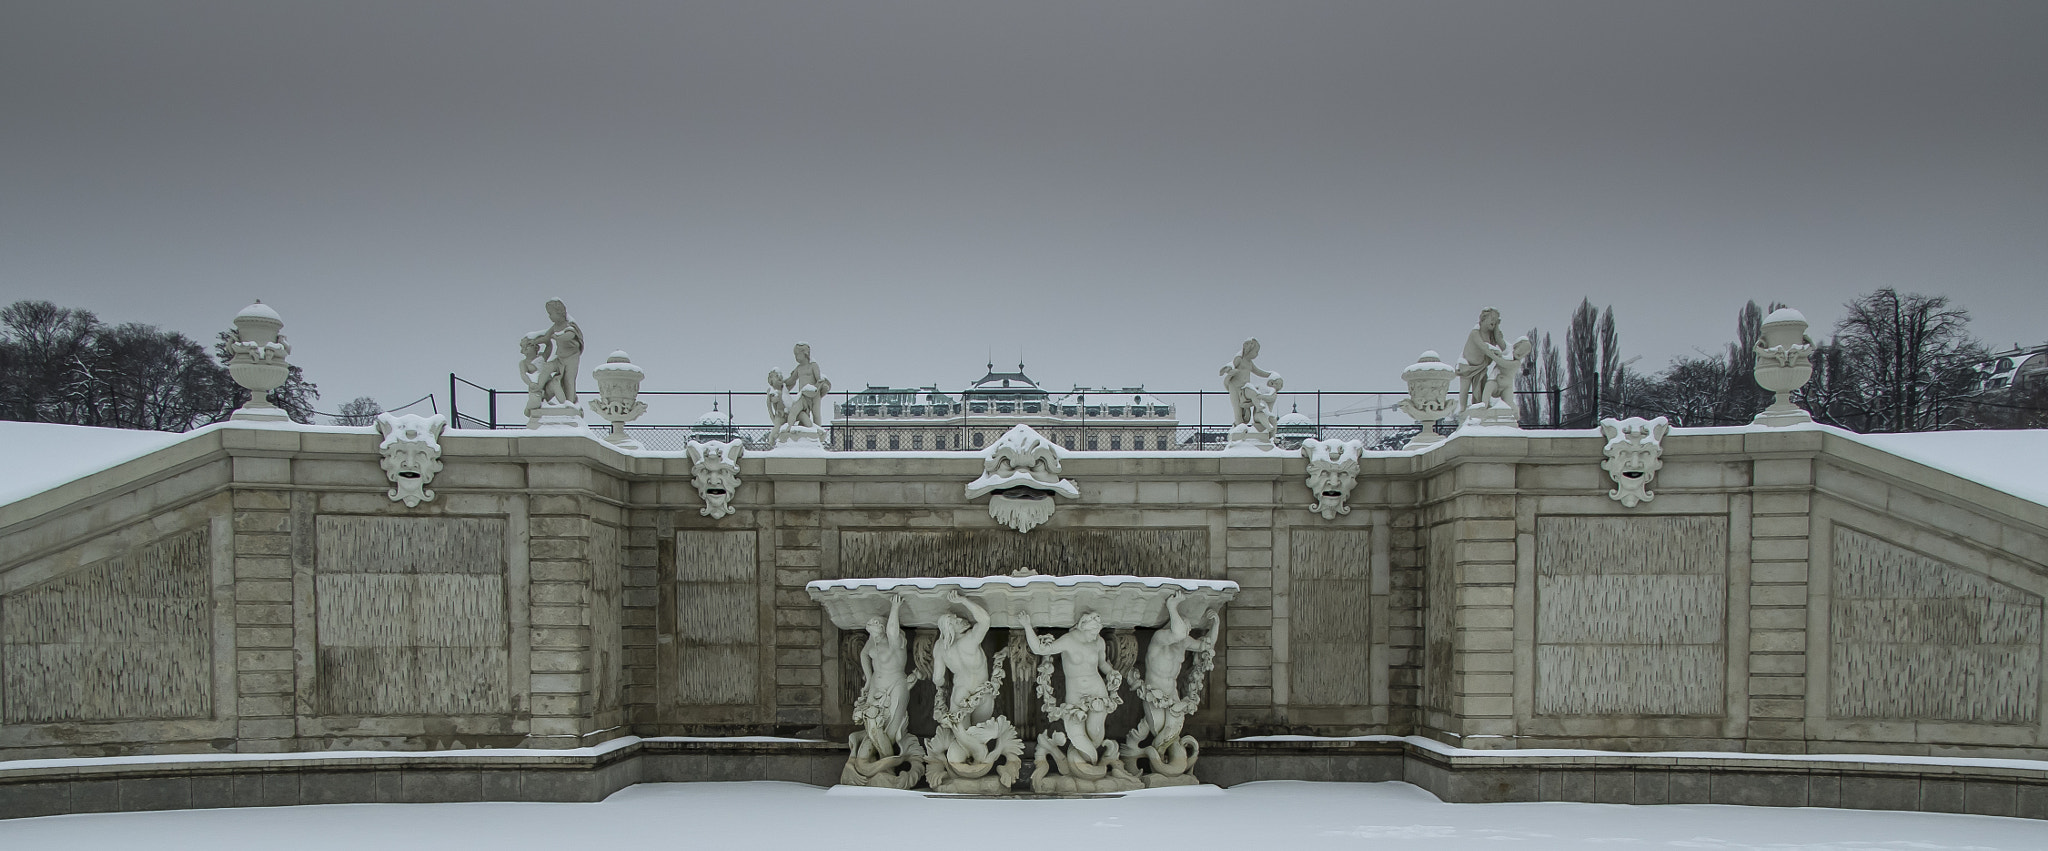 Olympus OM-D E-M10 II sample photo. Fountain belvedere palace vienna photography